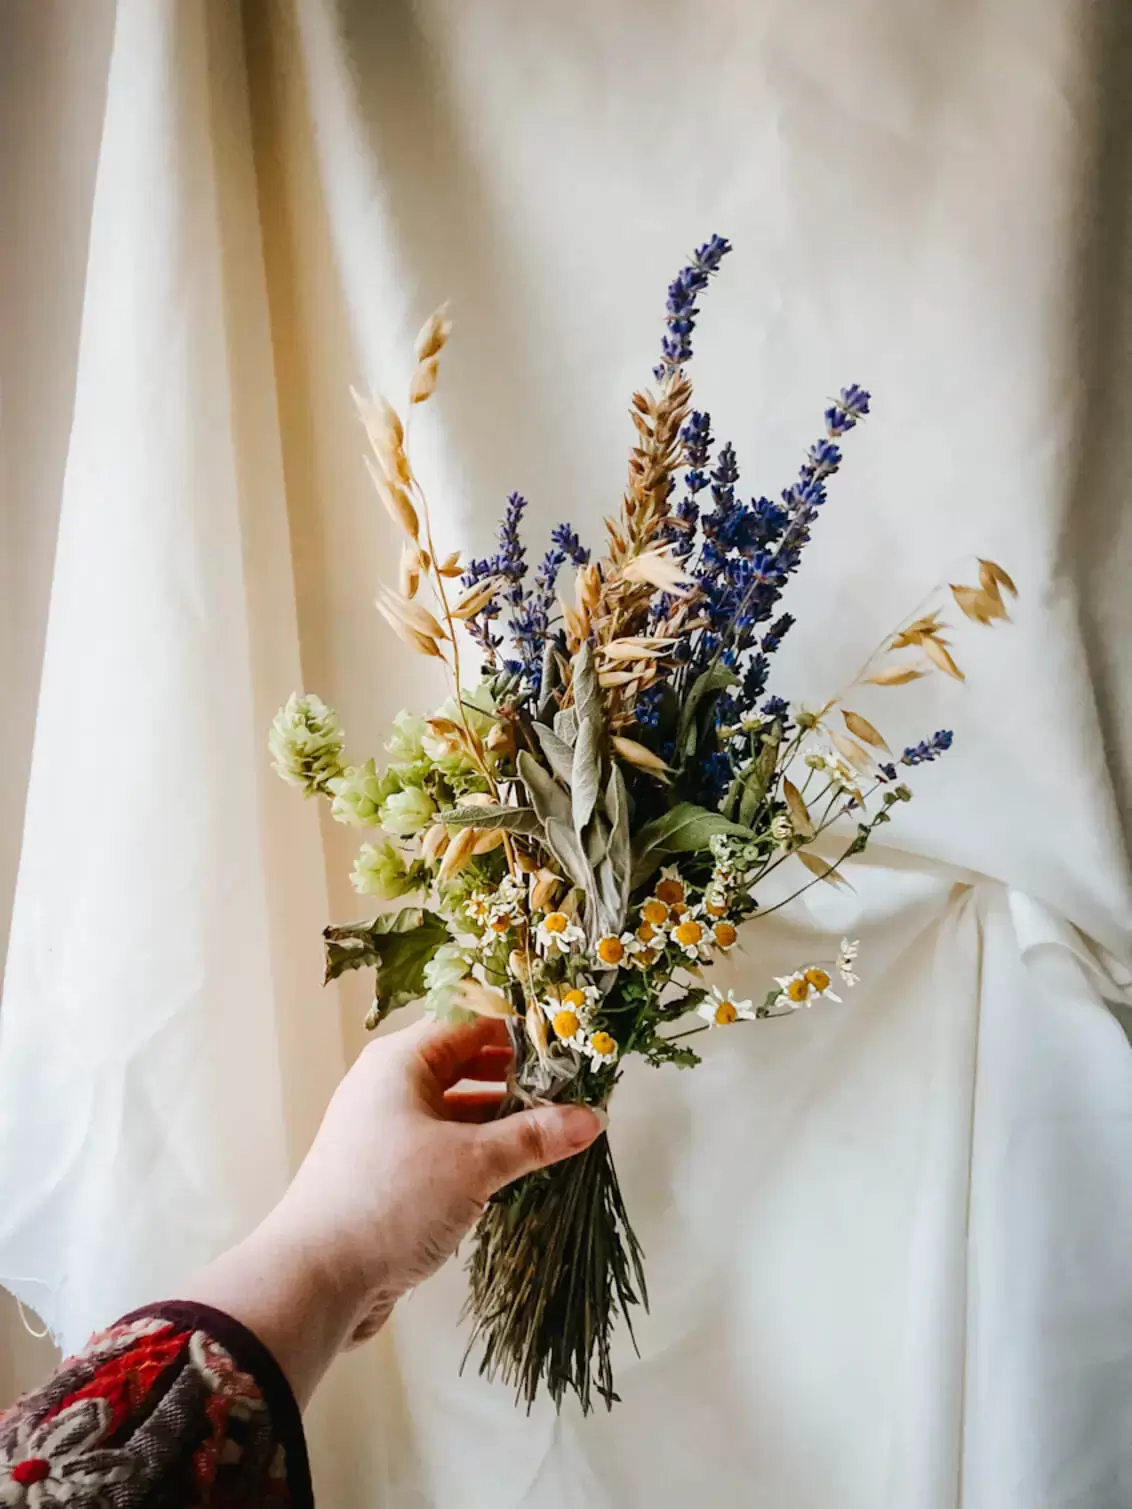 A Posy of Everlasting Dried Flowers and Herbs, Held by a Hand against a White Background